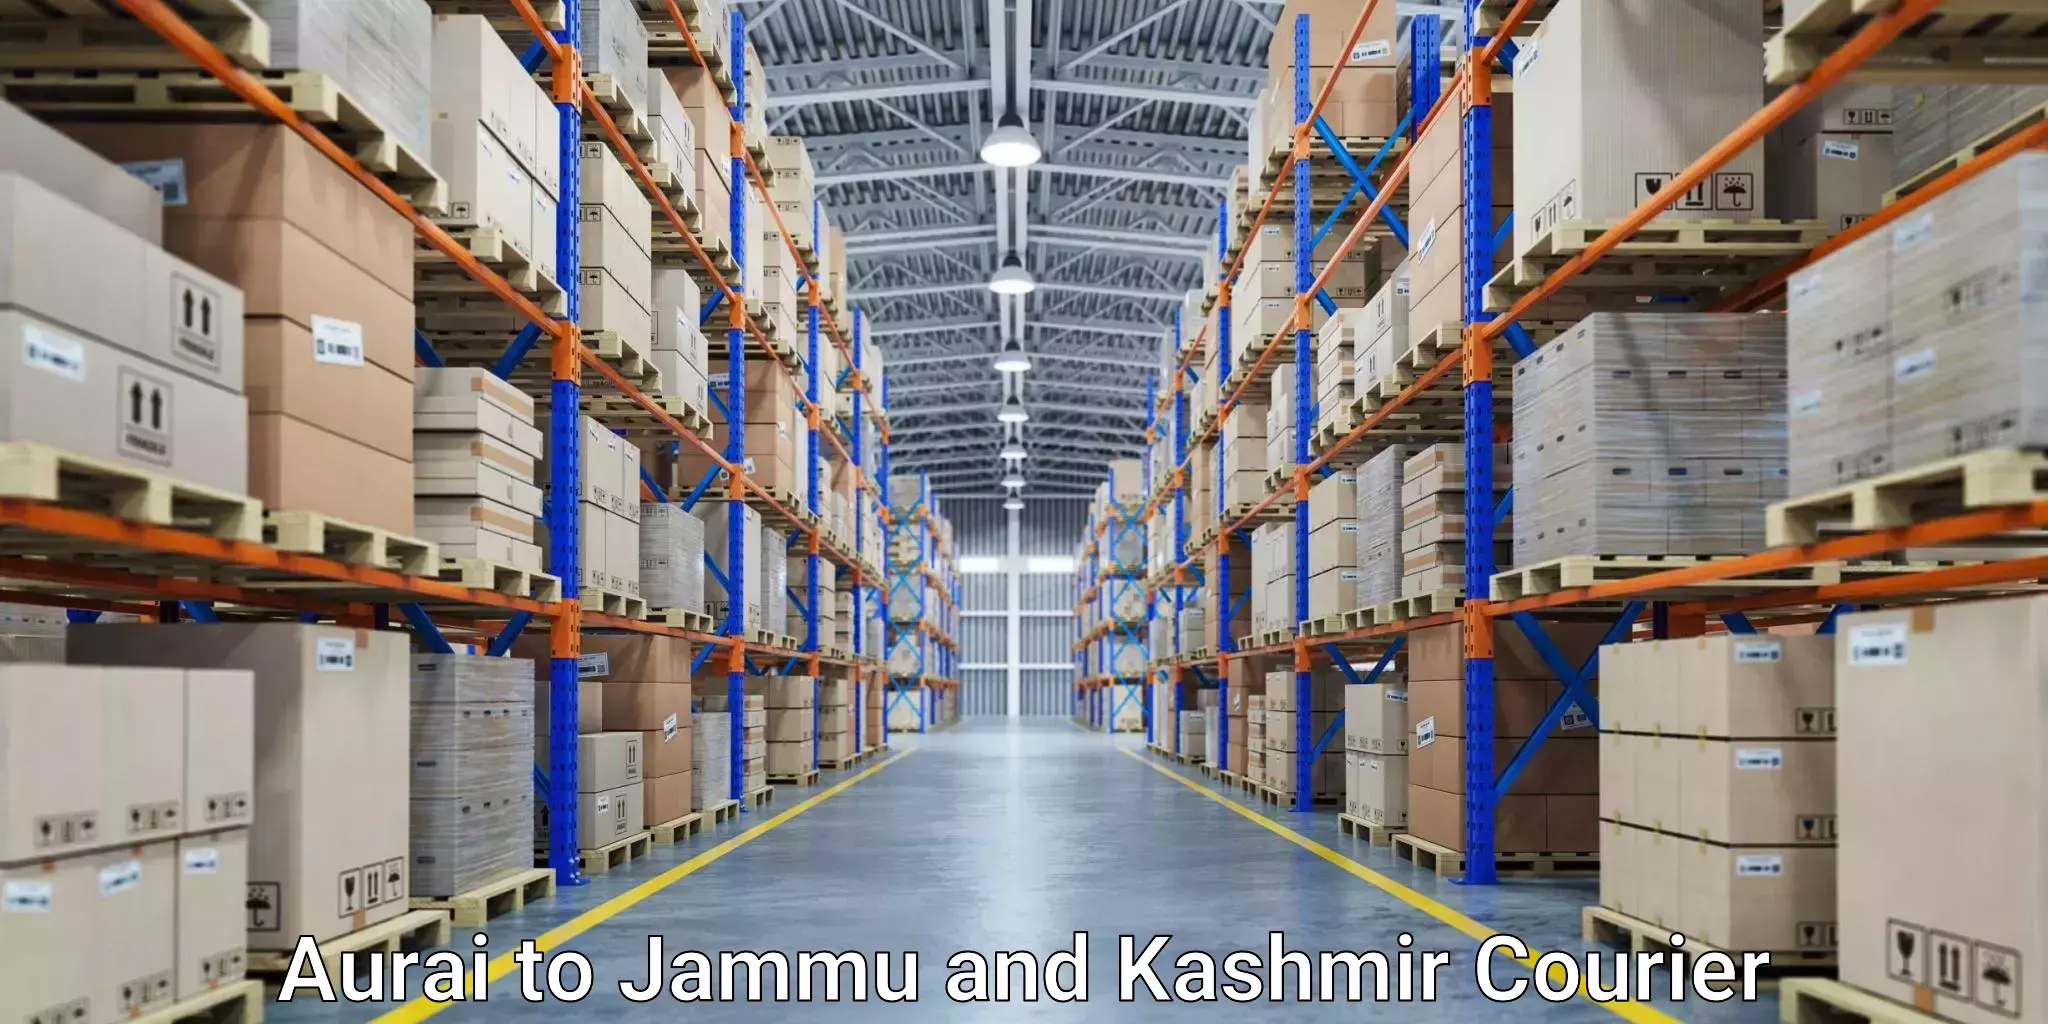 Courier service efficiency in Aurai to University of Jammu